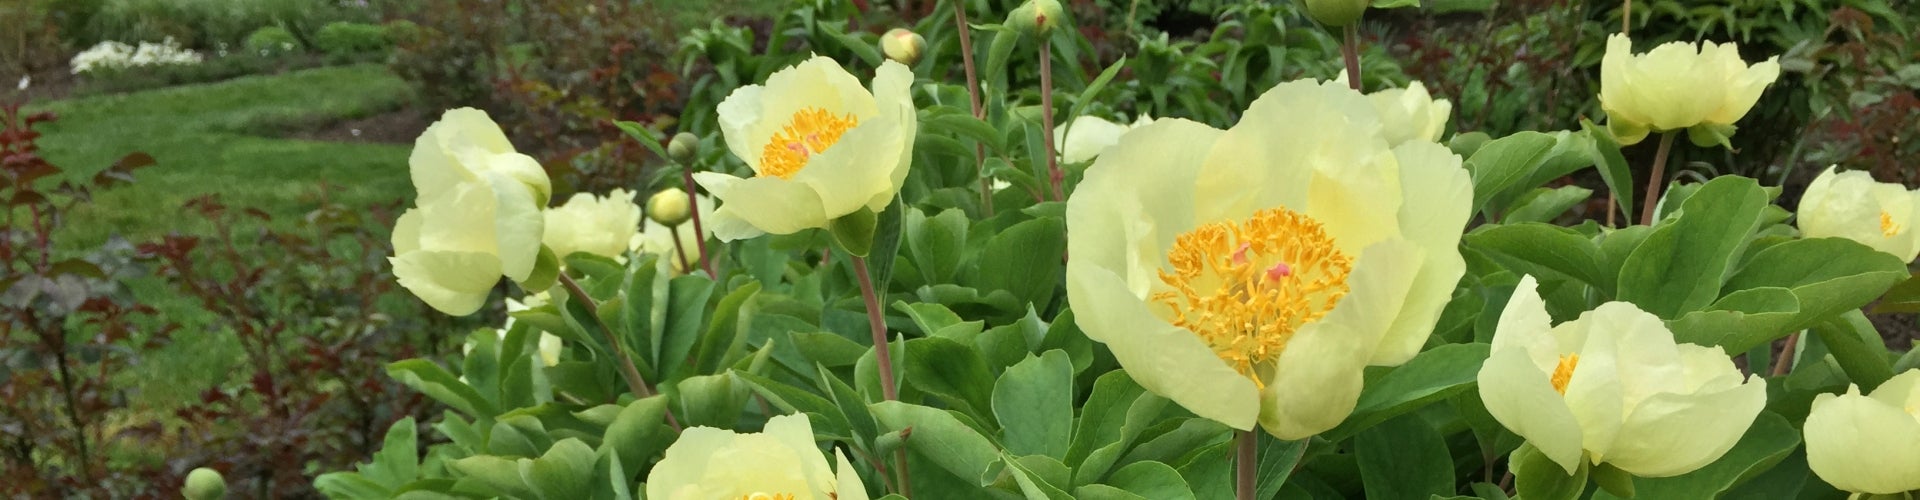 A cluster of bright yellow peony flowers growing in a garden.